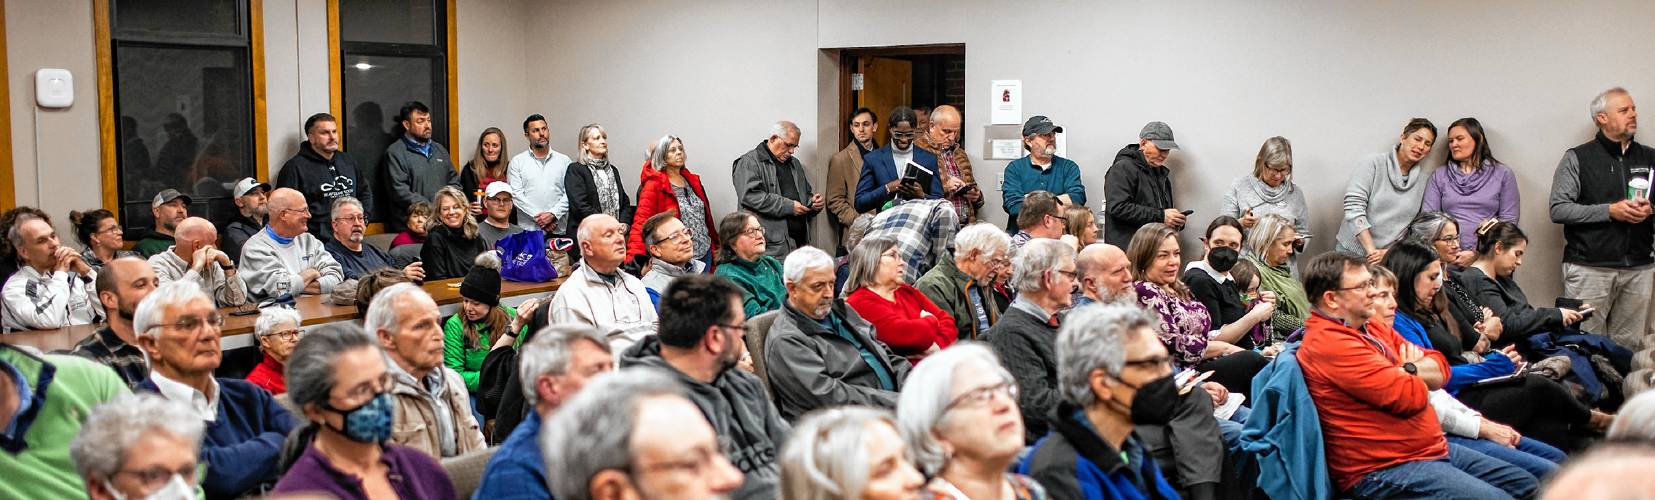 The Concord City Council chambers was overflowing on Monday night to hear the discussion of the proposed Beaver Meadow Clubhouse among other public input items. The council tabled the clubhouse vote.